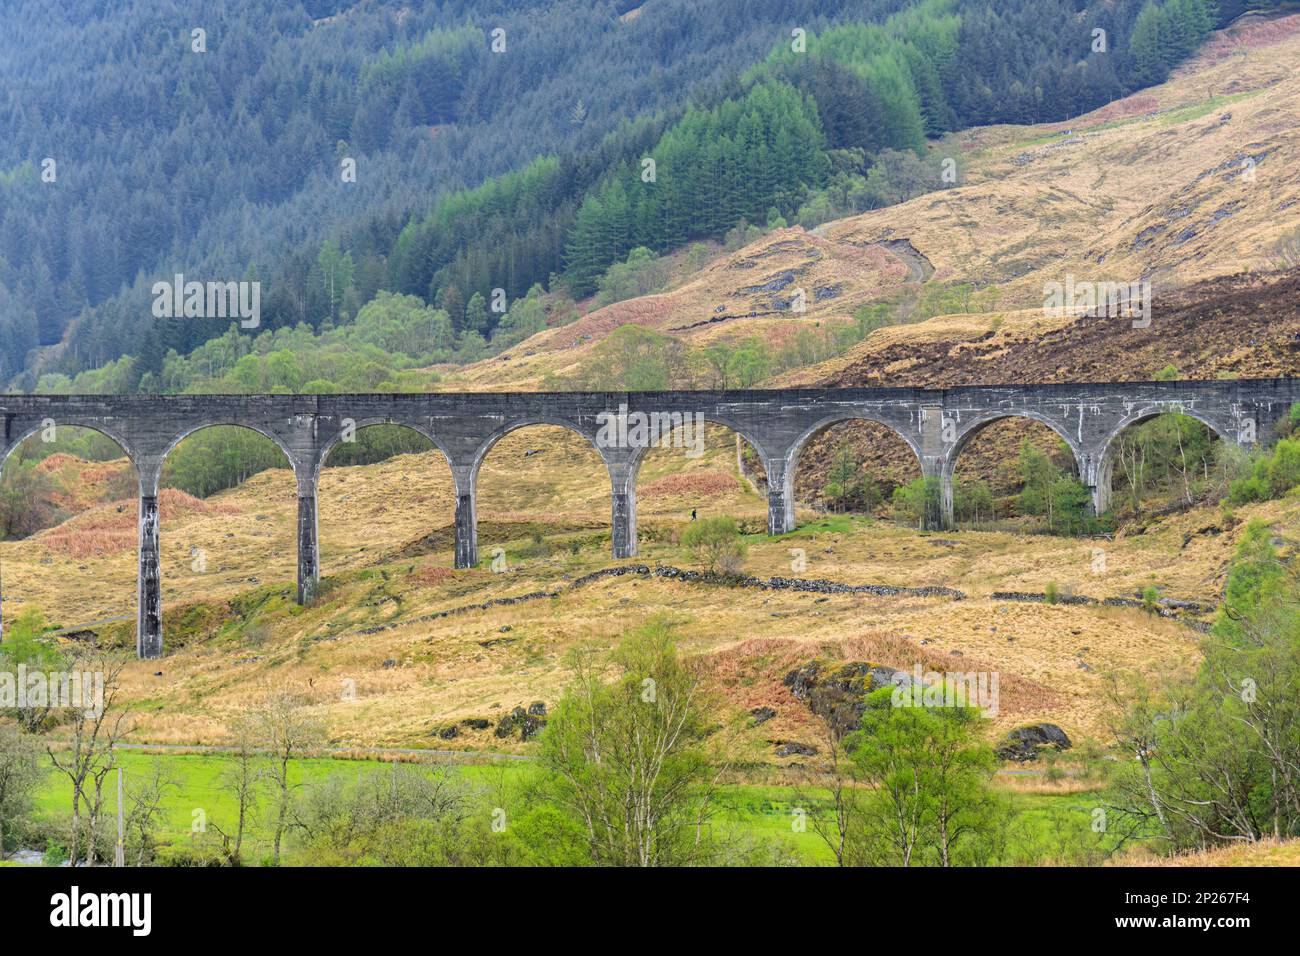 The Glenfinnan Viaduct is a railway viaduct on the West Highland Line in Glenfinnan, Inverness-shire, Scotland. Stock Photo